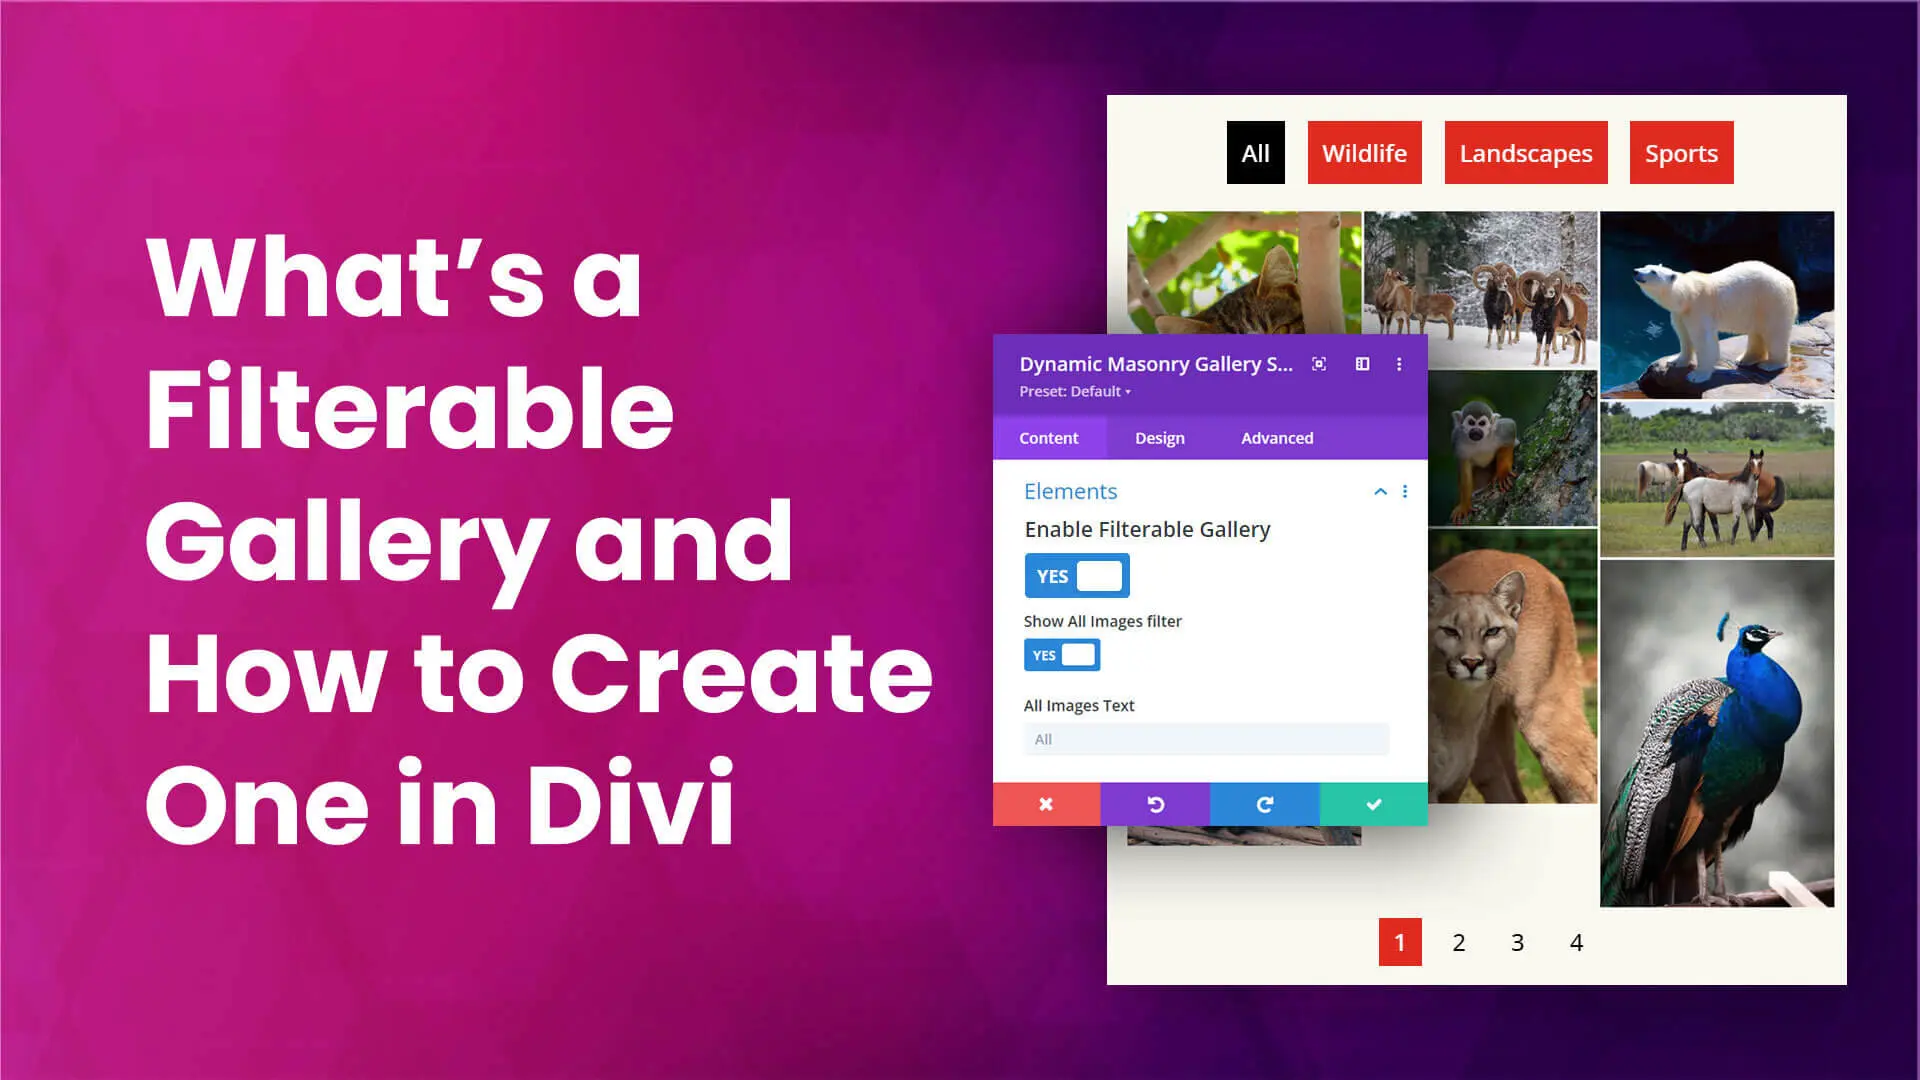 How to create a Divi filterable gallery